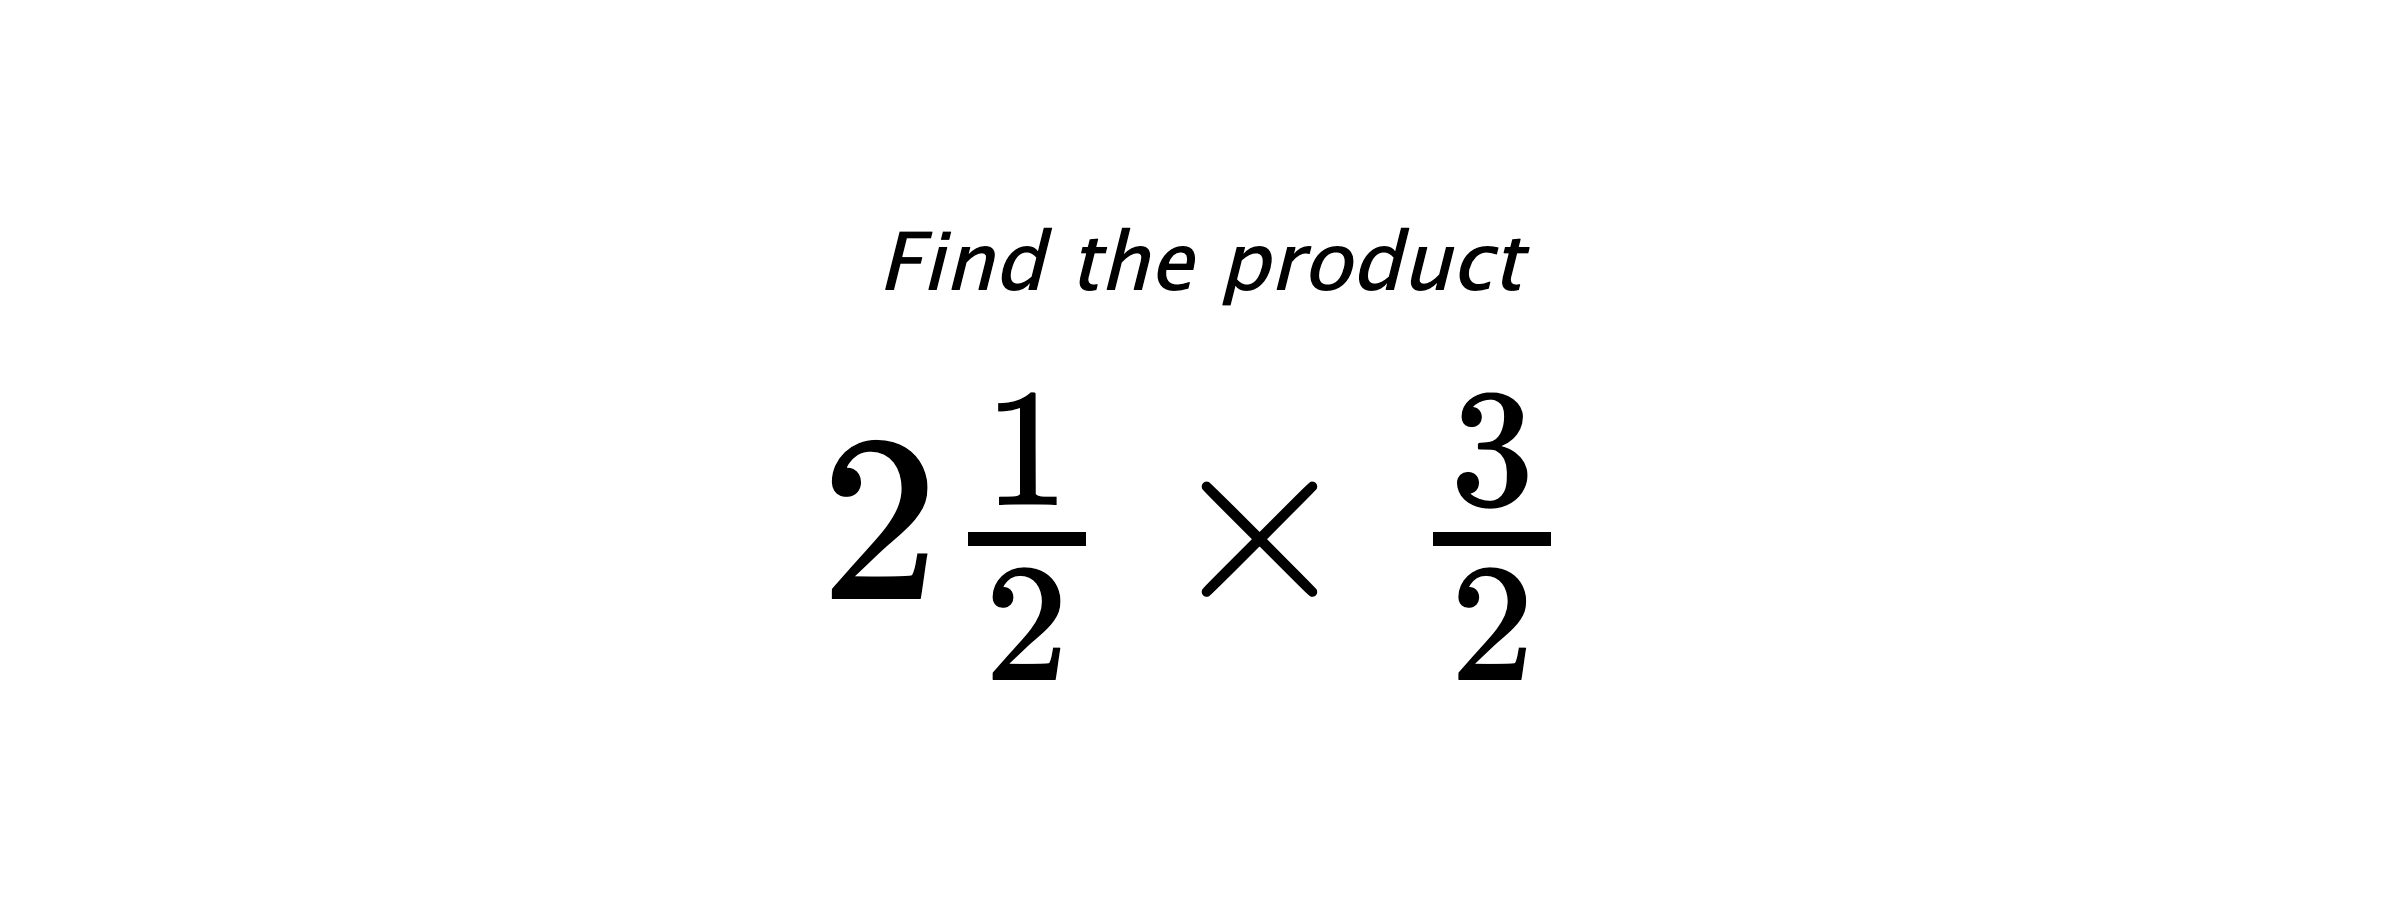 Find the product $ 2\frac{1}{2} \times \frac{3}{2} $